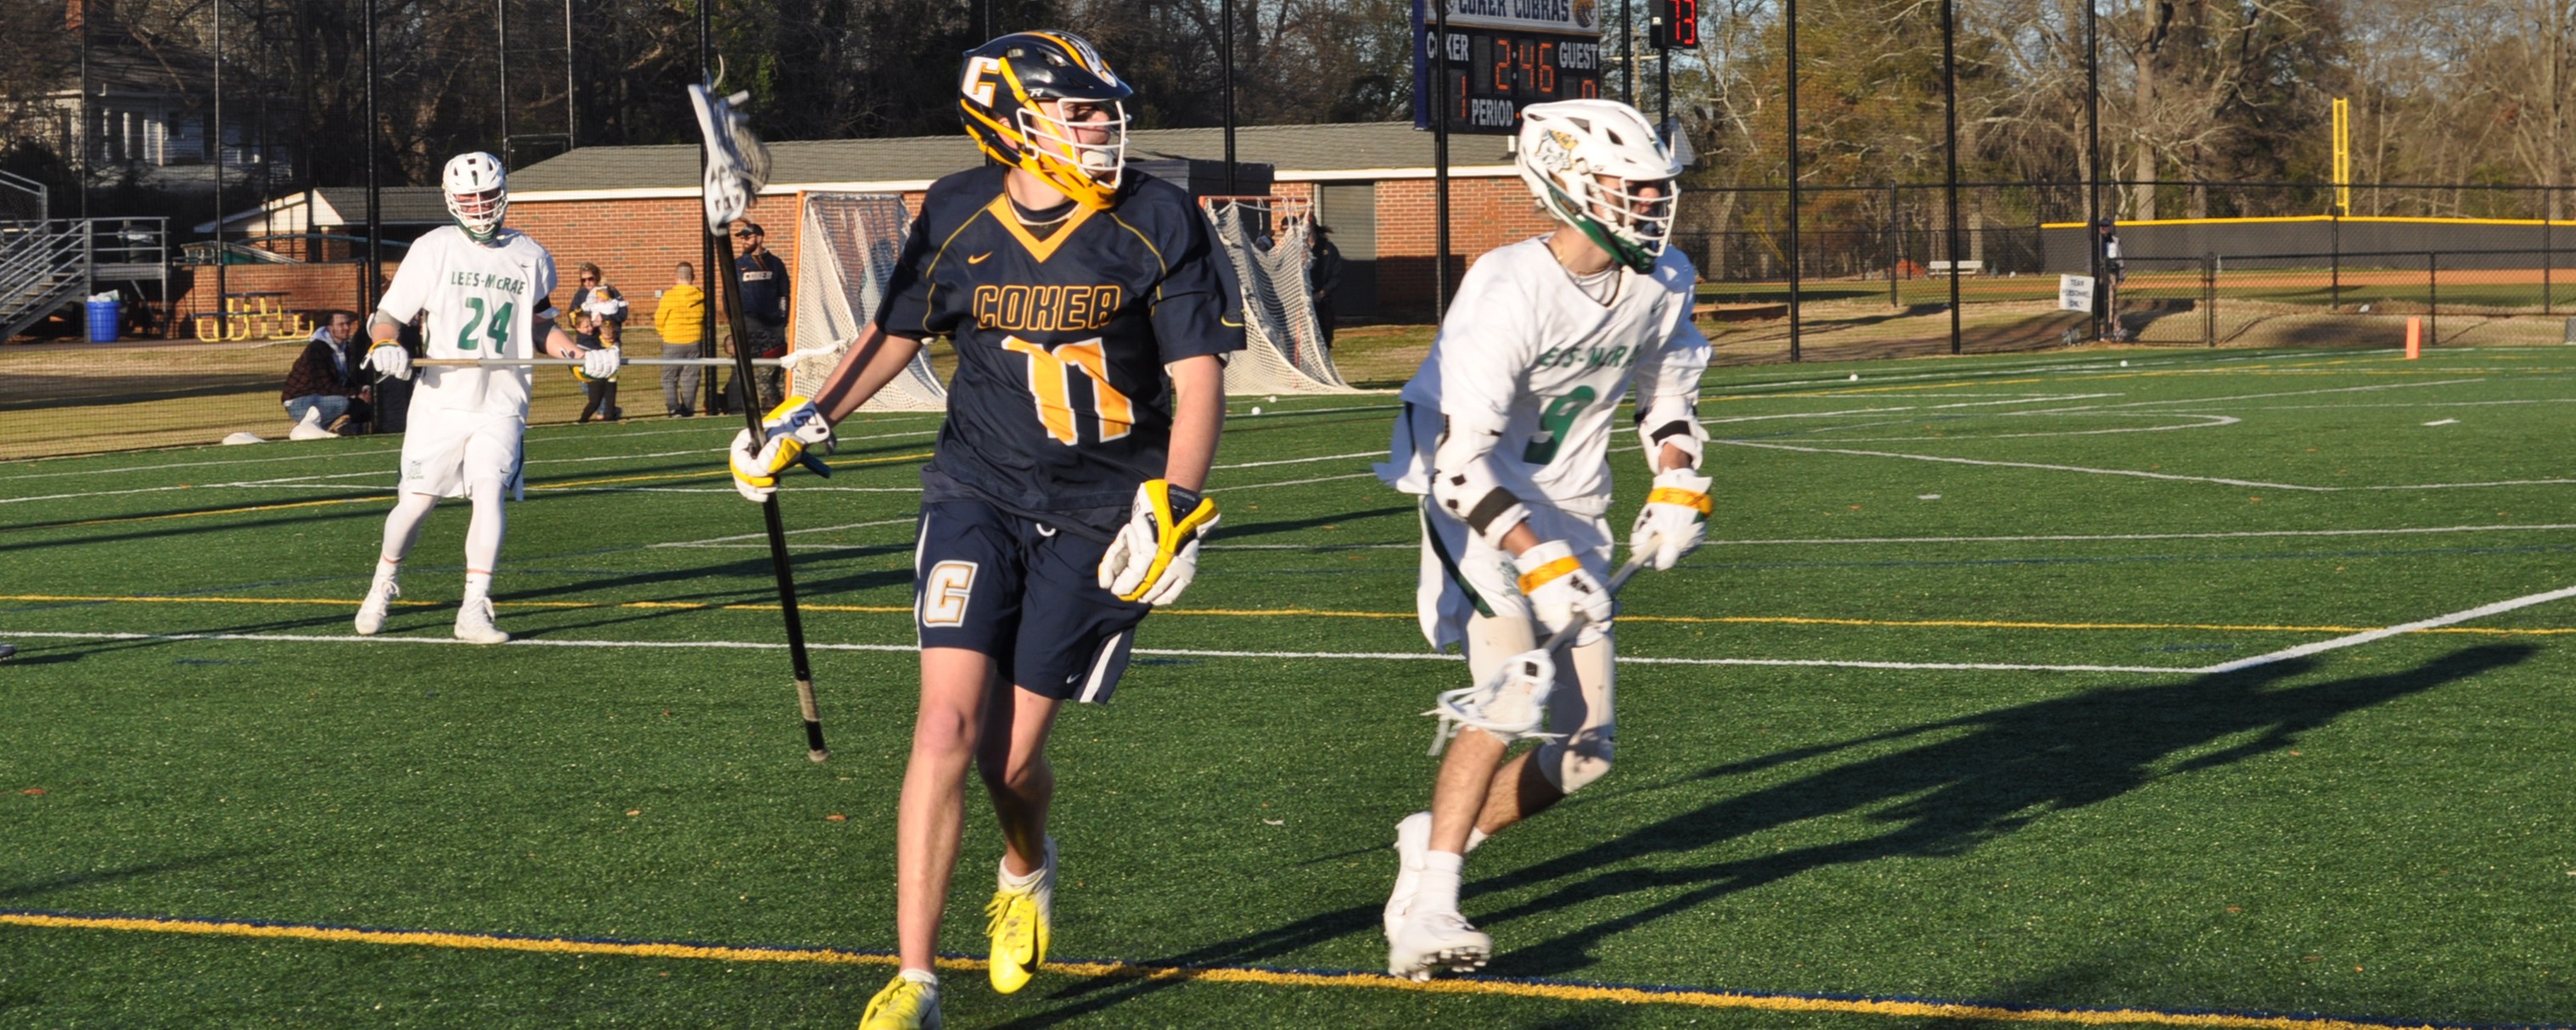 Men's Lacrosse Ready to Roll for the 2021 Season